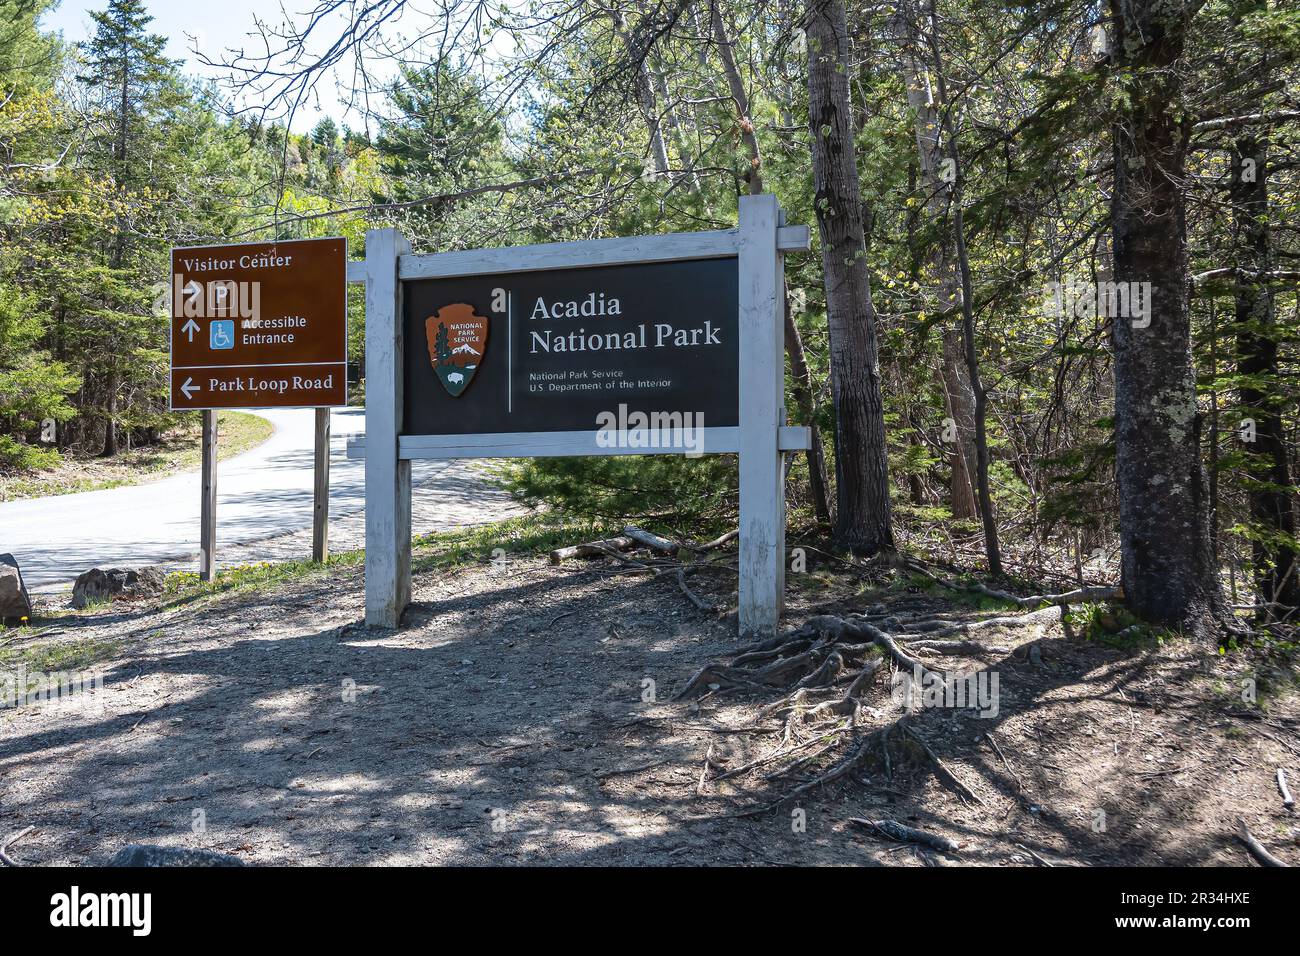 Acadia National sign and sign with directions to the Park Loop Road and the Visitor Center. Stock Photo